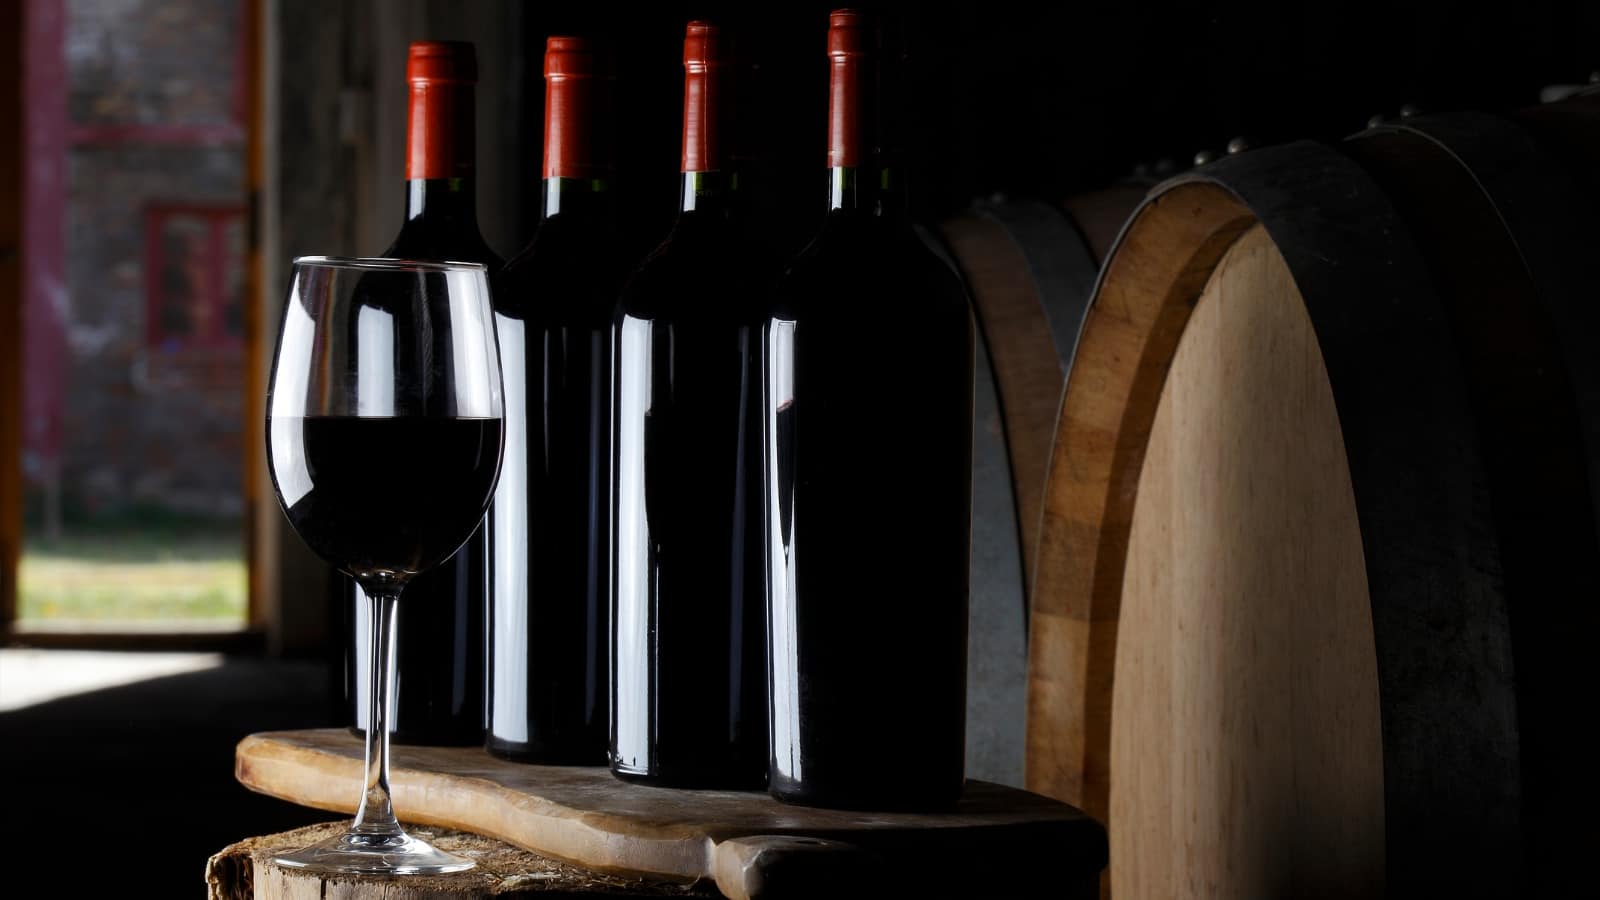 a glass of red wine stands against the background of bottles of wine and wine barrels